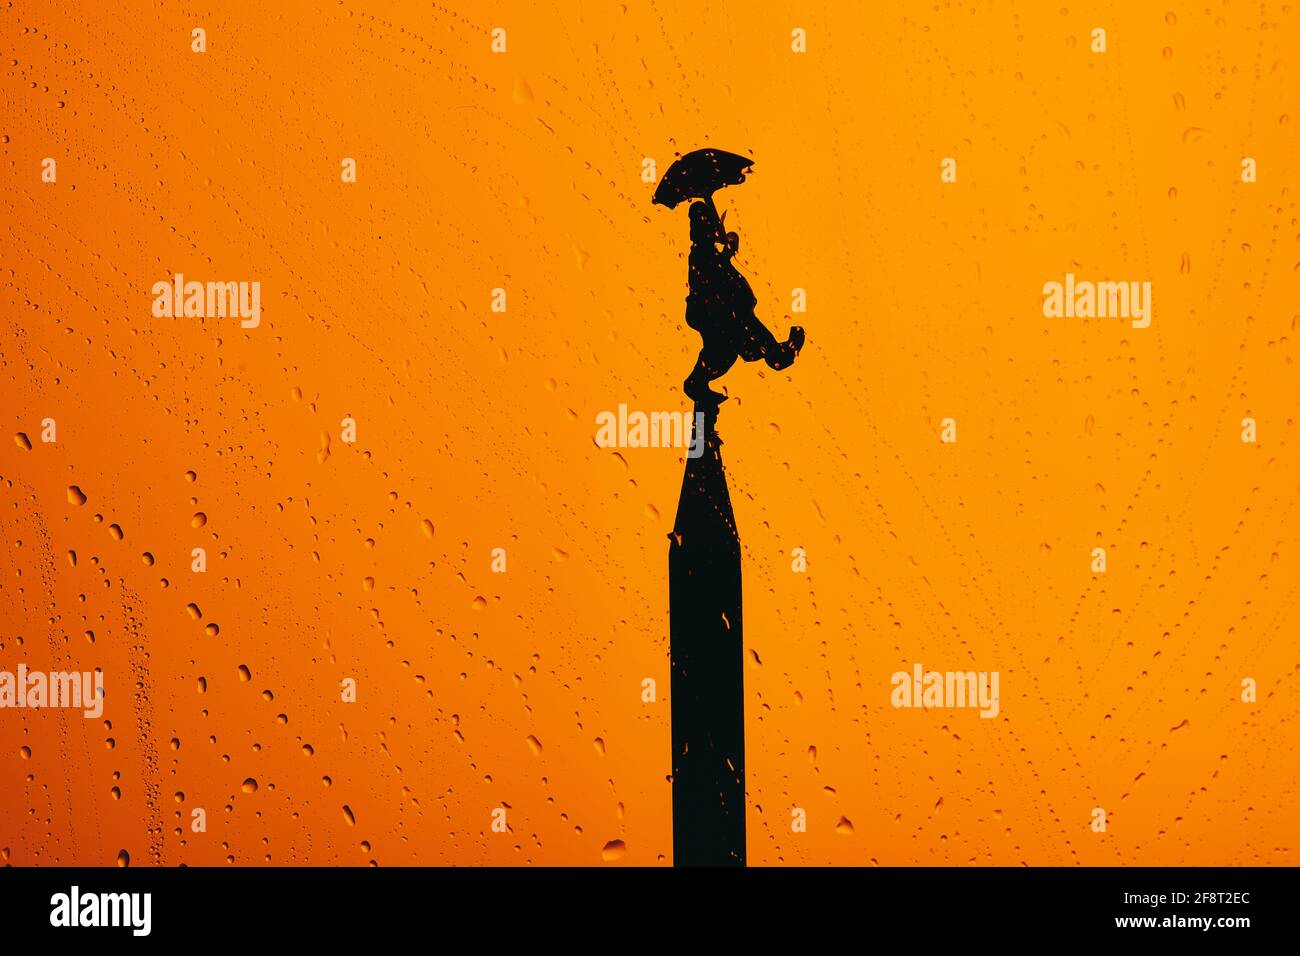 April fool's day with a silhouette of a clown on top of a tower on orange background with drops Stock Photo